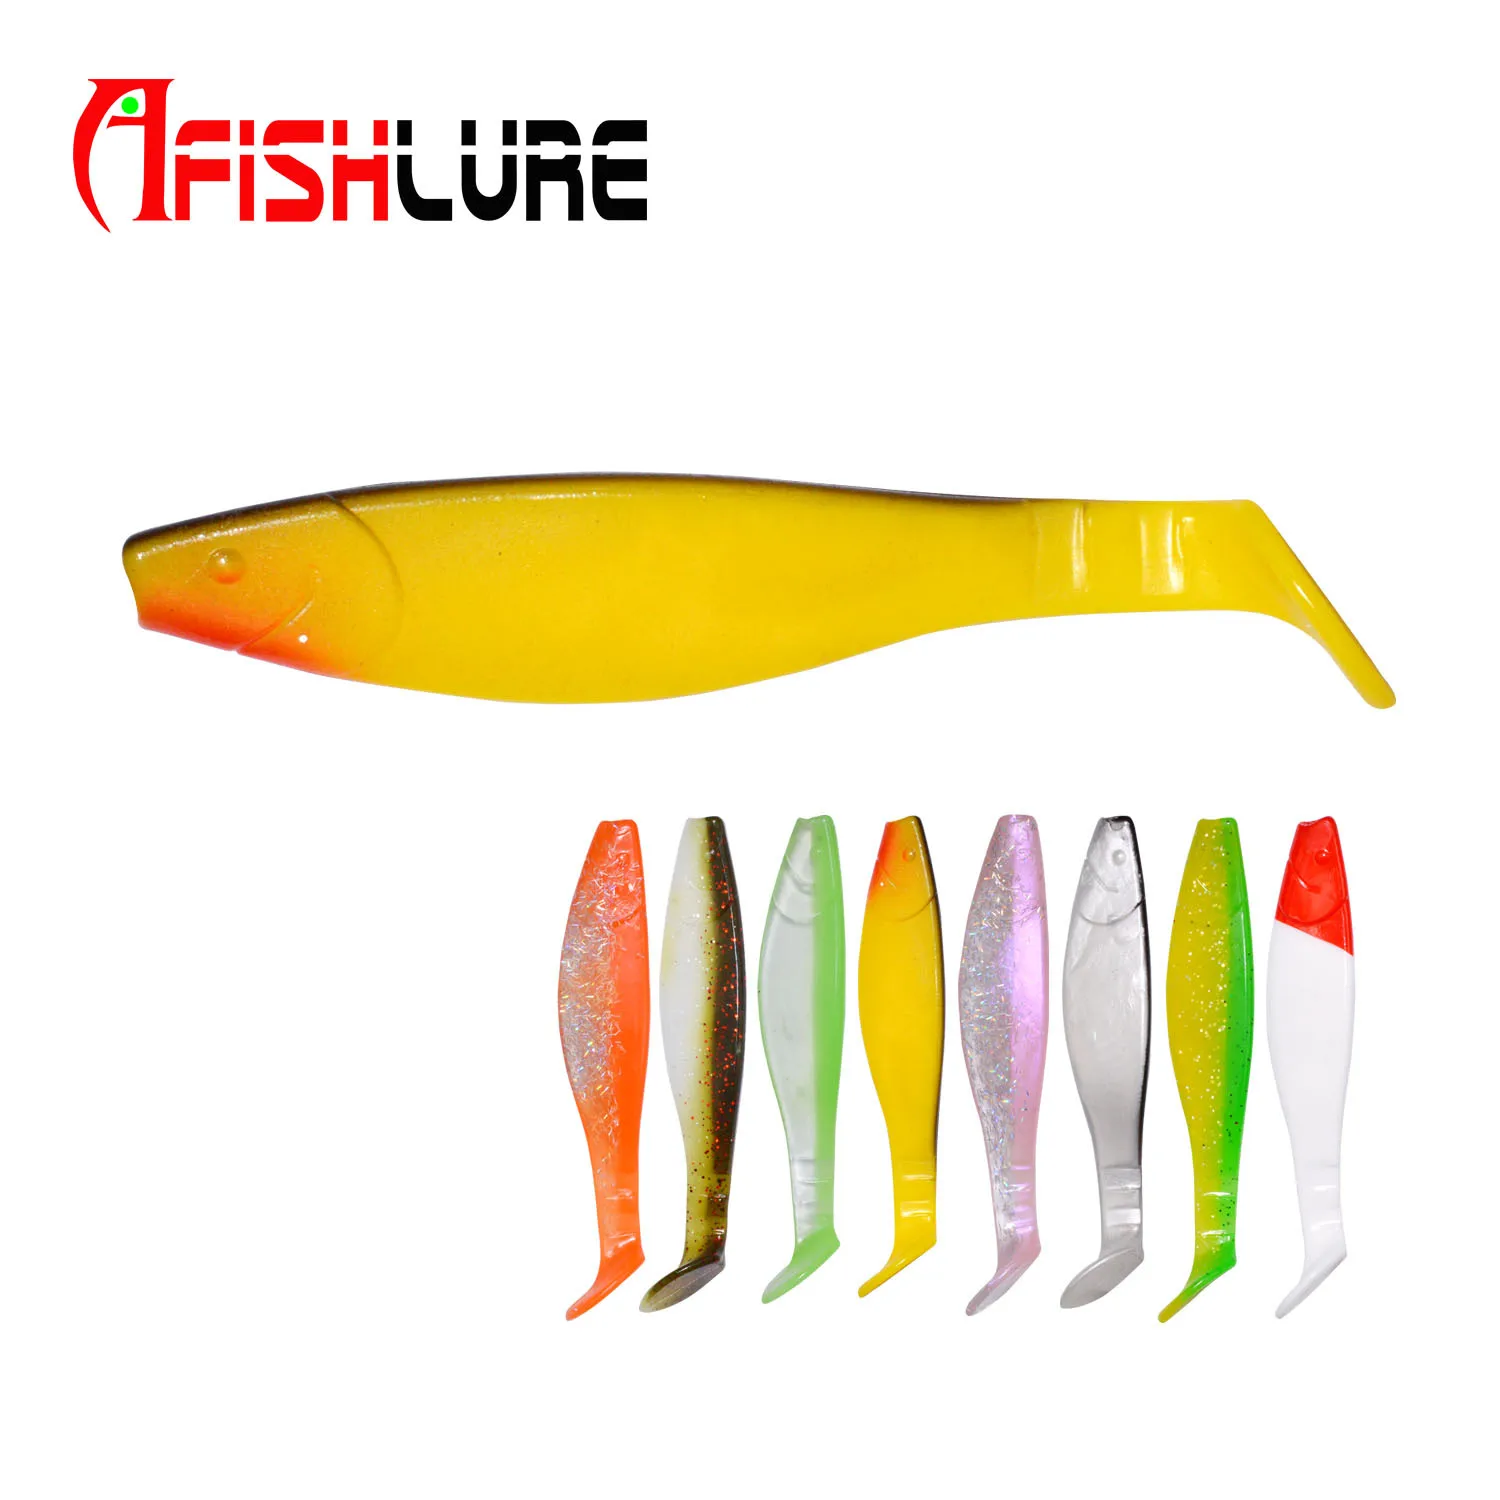 

Afishlure Lure Fishing 110mm/9.5 Jighead Bait Wobblers Worms Soft Lures Pesca Plastic Worms Texas Rig Shad